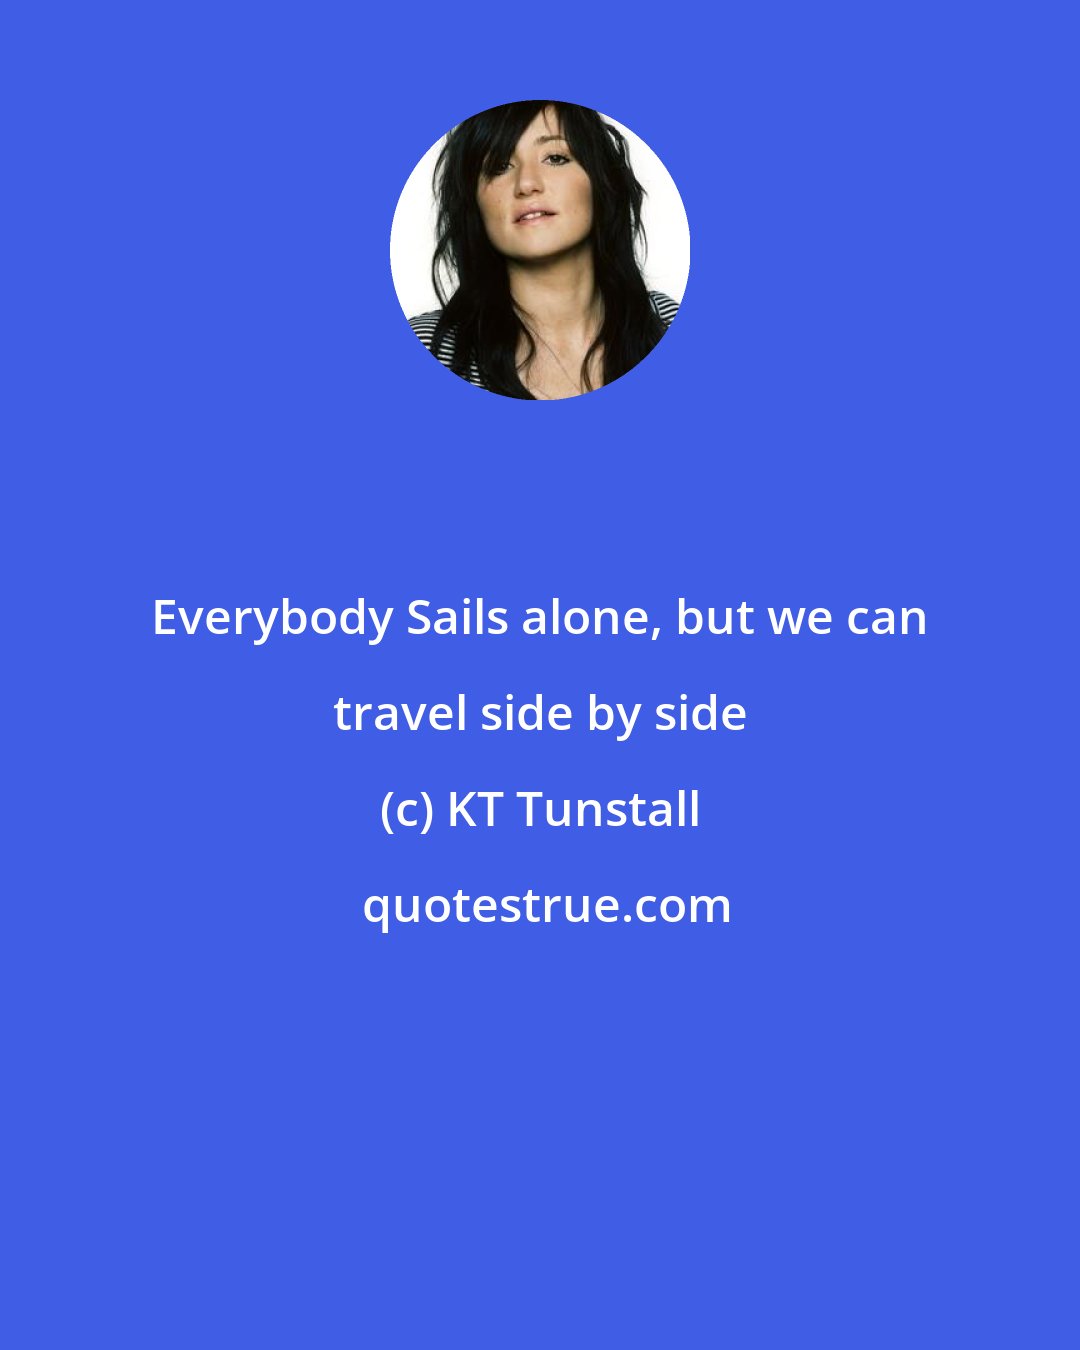 KT Tunstall: Everybody Sails alone, but we can travel side by side